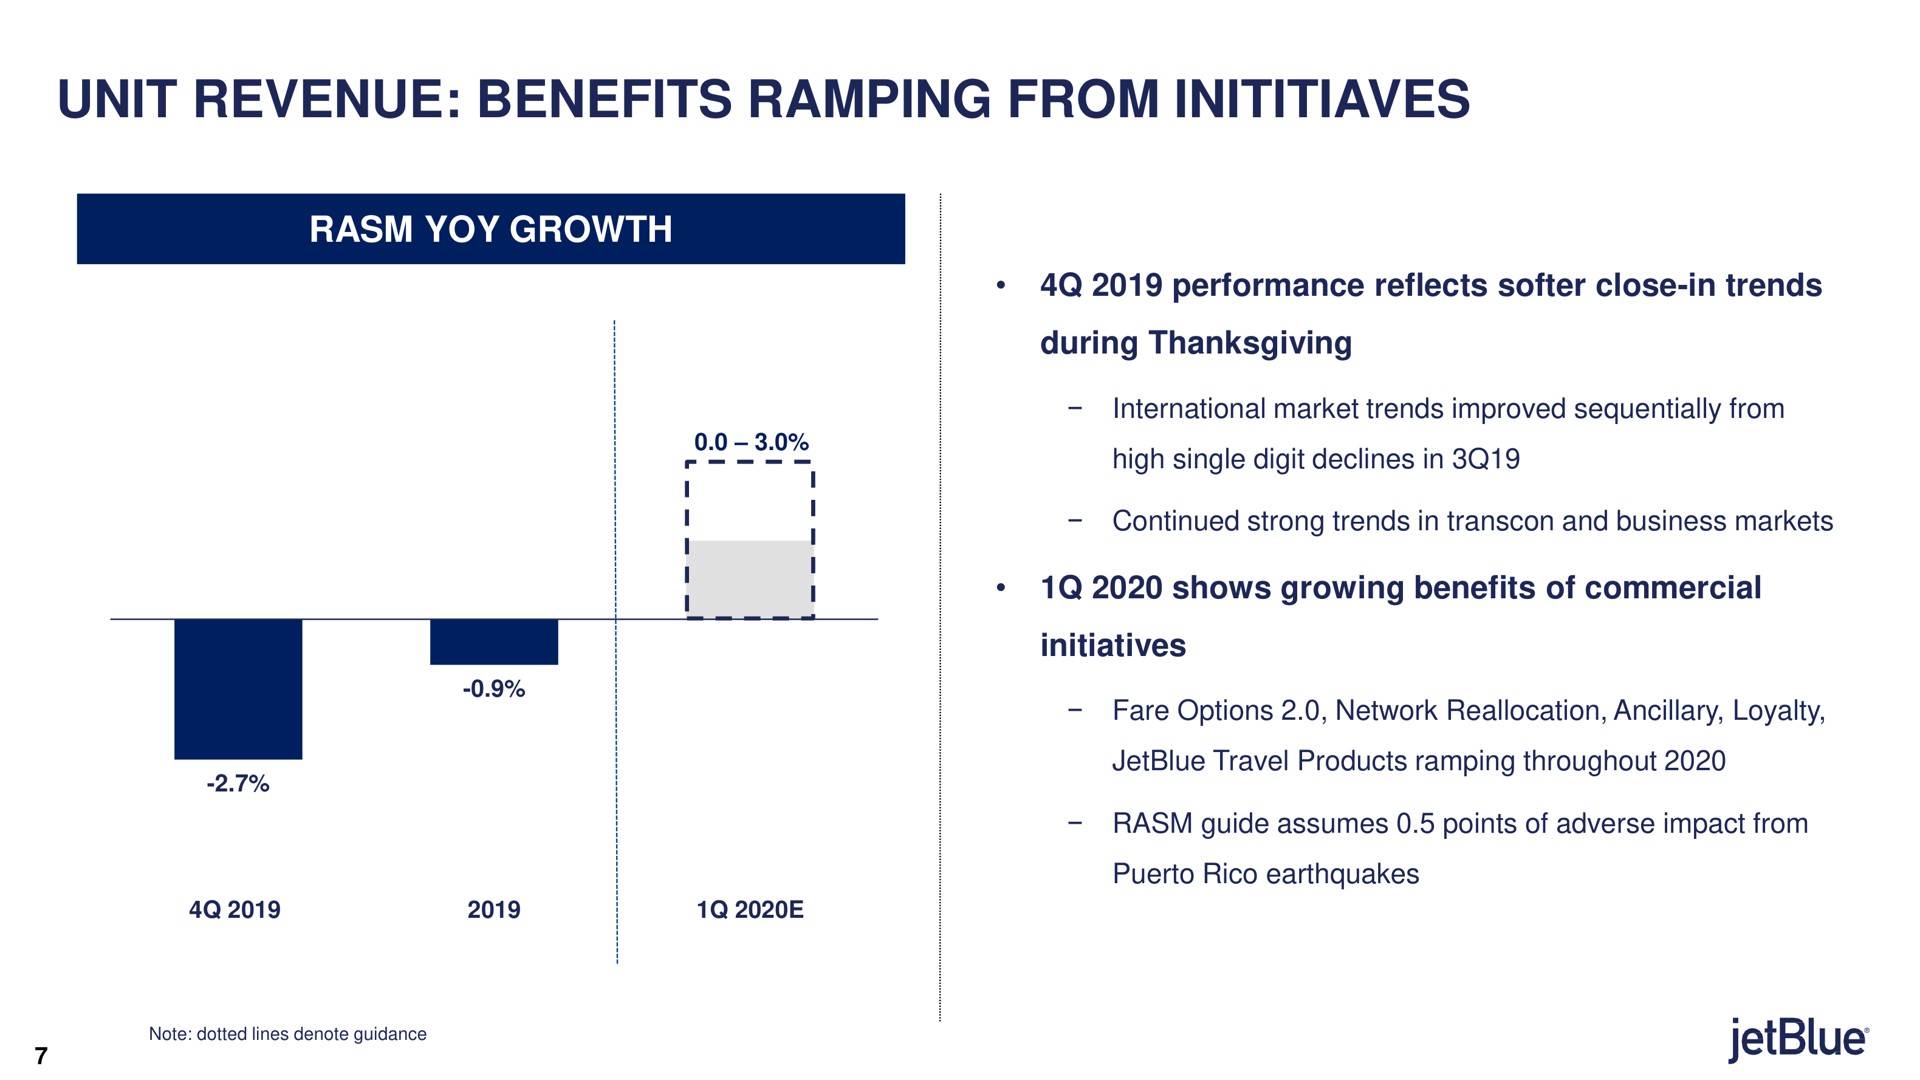 unit revenue benefits ramping from yoy growth performance reflects close in trends during thanksgiving shows growing benefits of commercial initiatives | jetBlue